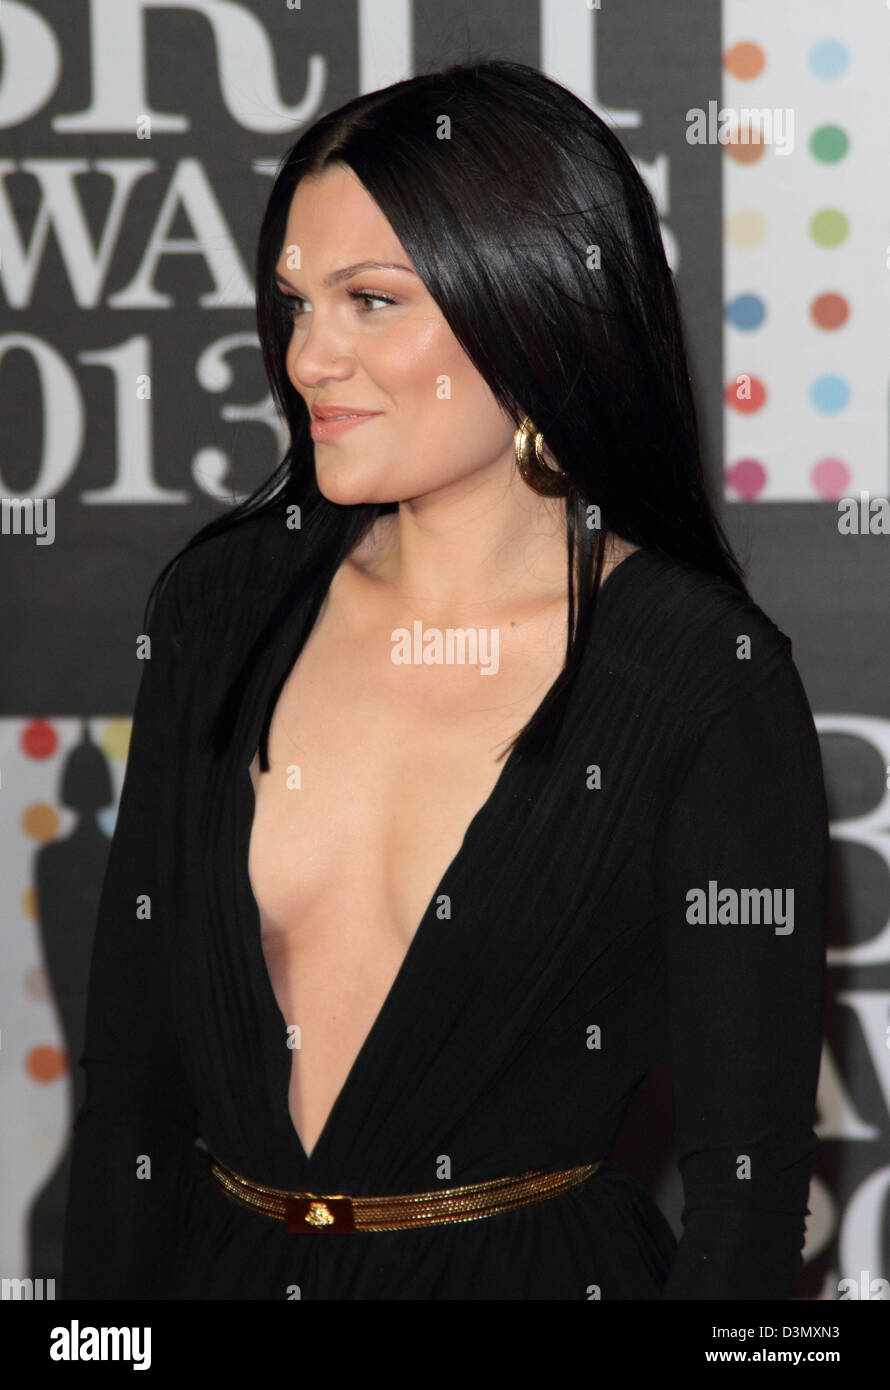 London, UK. 20th February 2013. Jessie J at the The 2013 Brit Awards at the O2 Arena, London - February 20th 2013  Photo by Keith Mayhew/ Alamy Live News Stock Photo